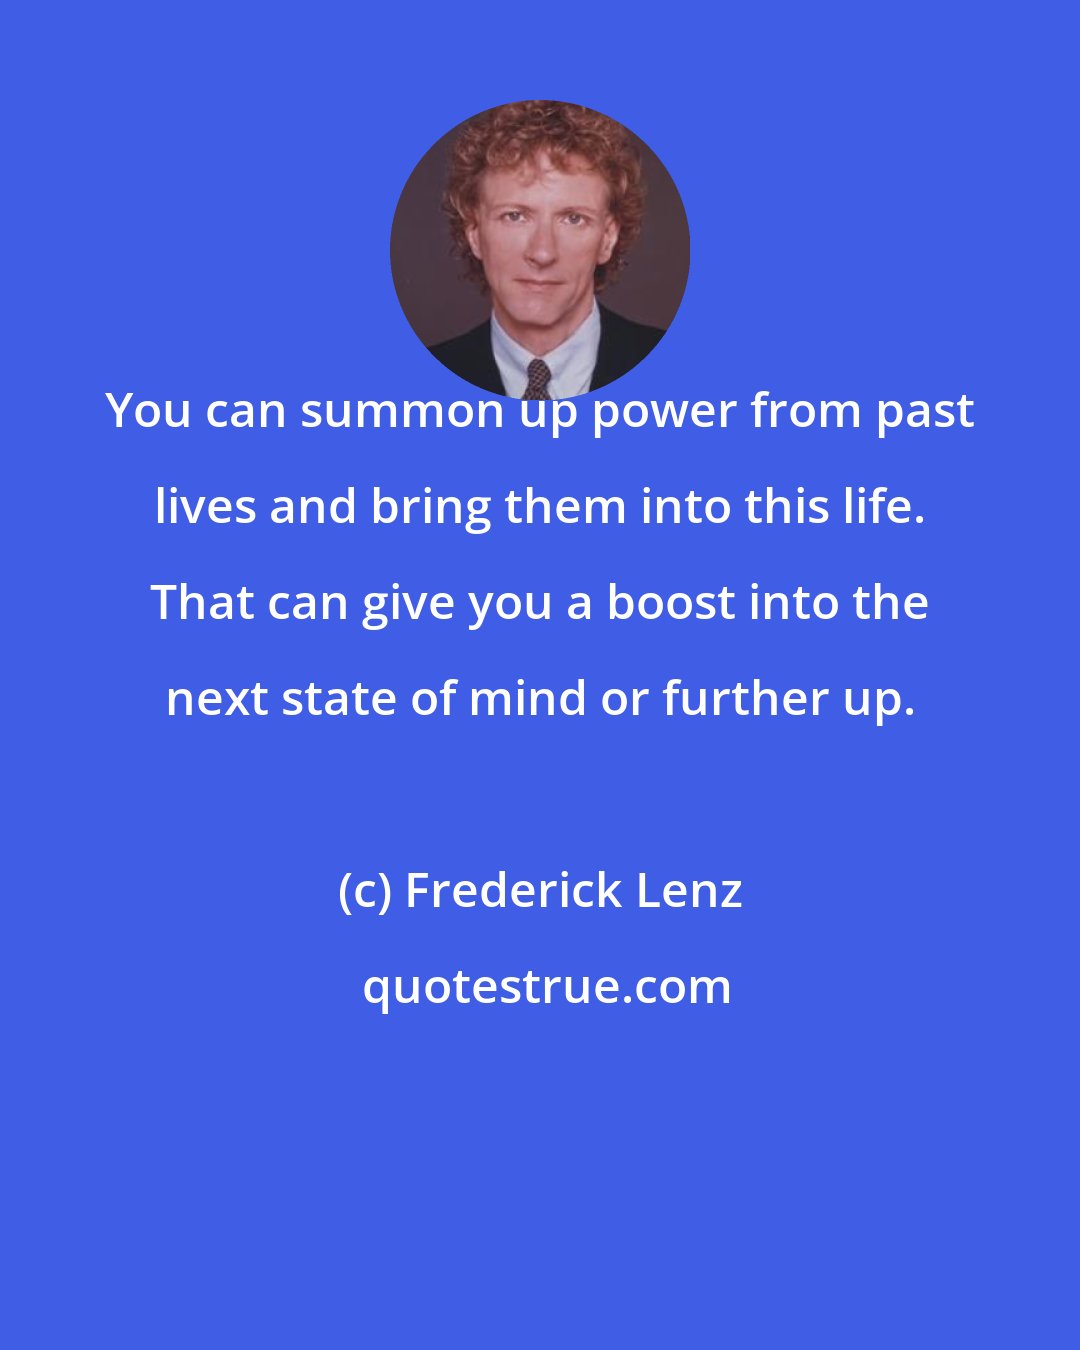 Frederick Lenz: You can summon up power from past lives and bring them into this life. That can give you a boost into the next state of mind or further up.